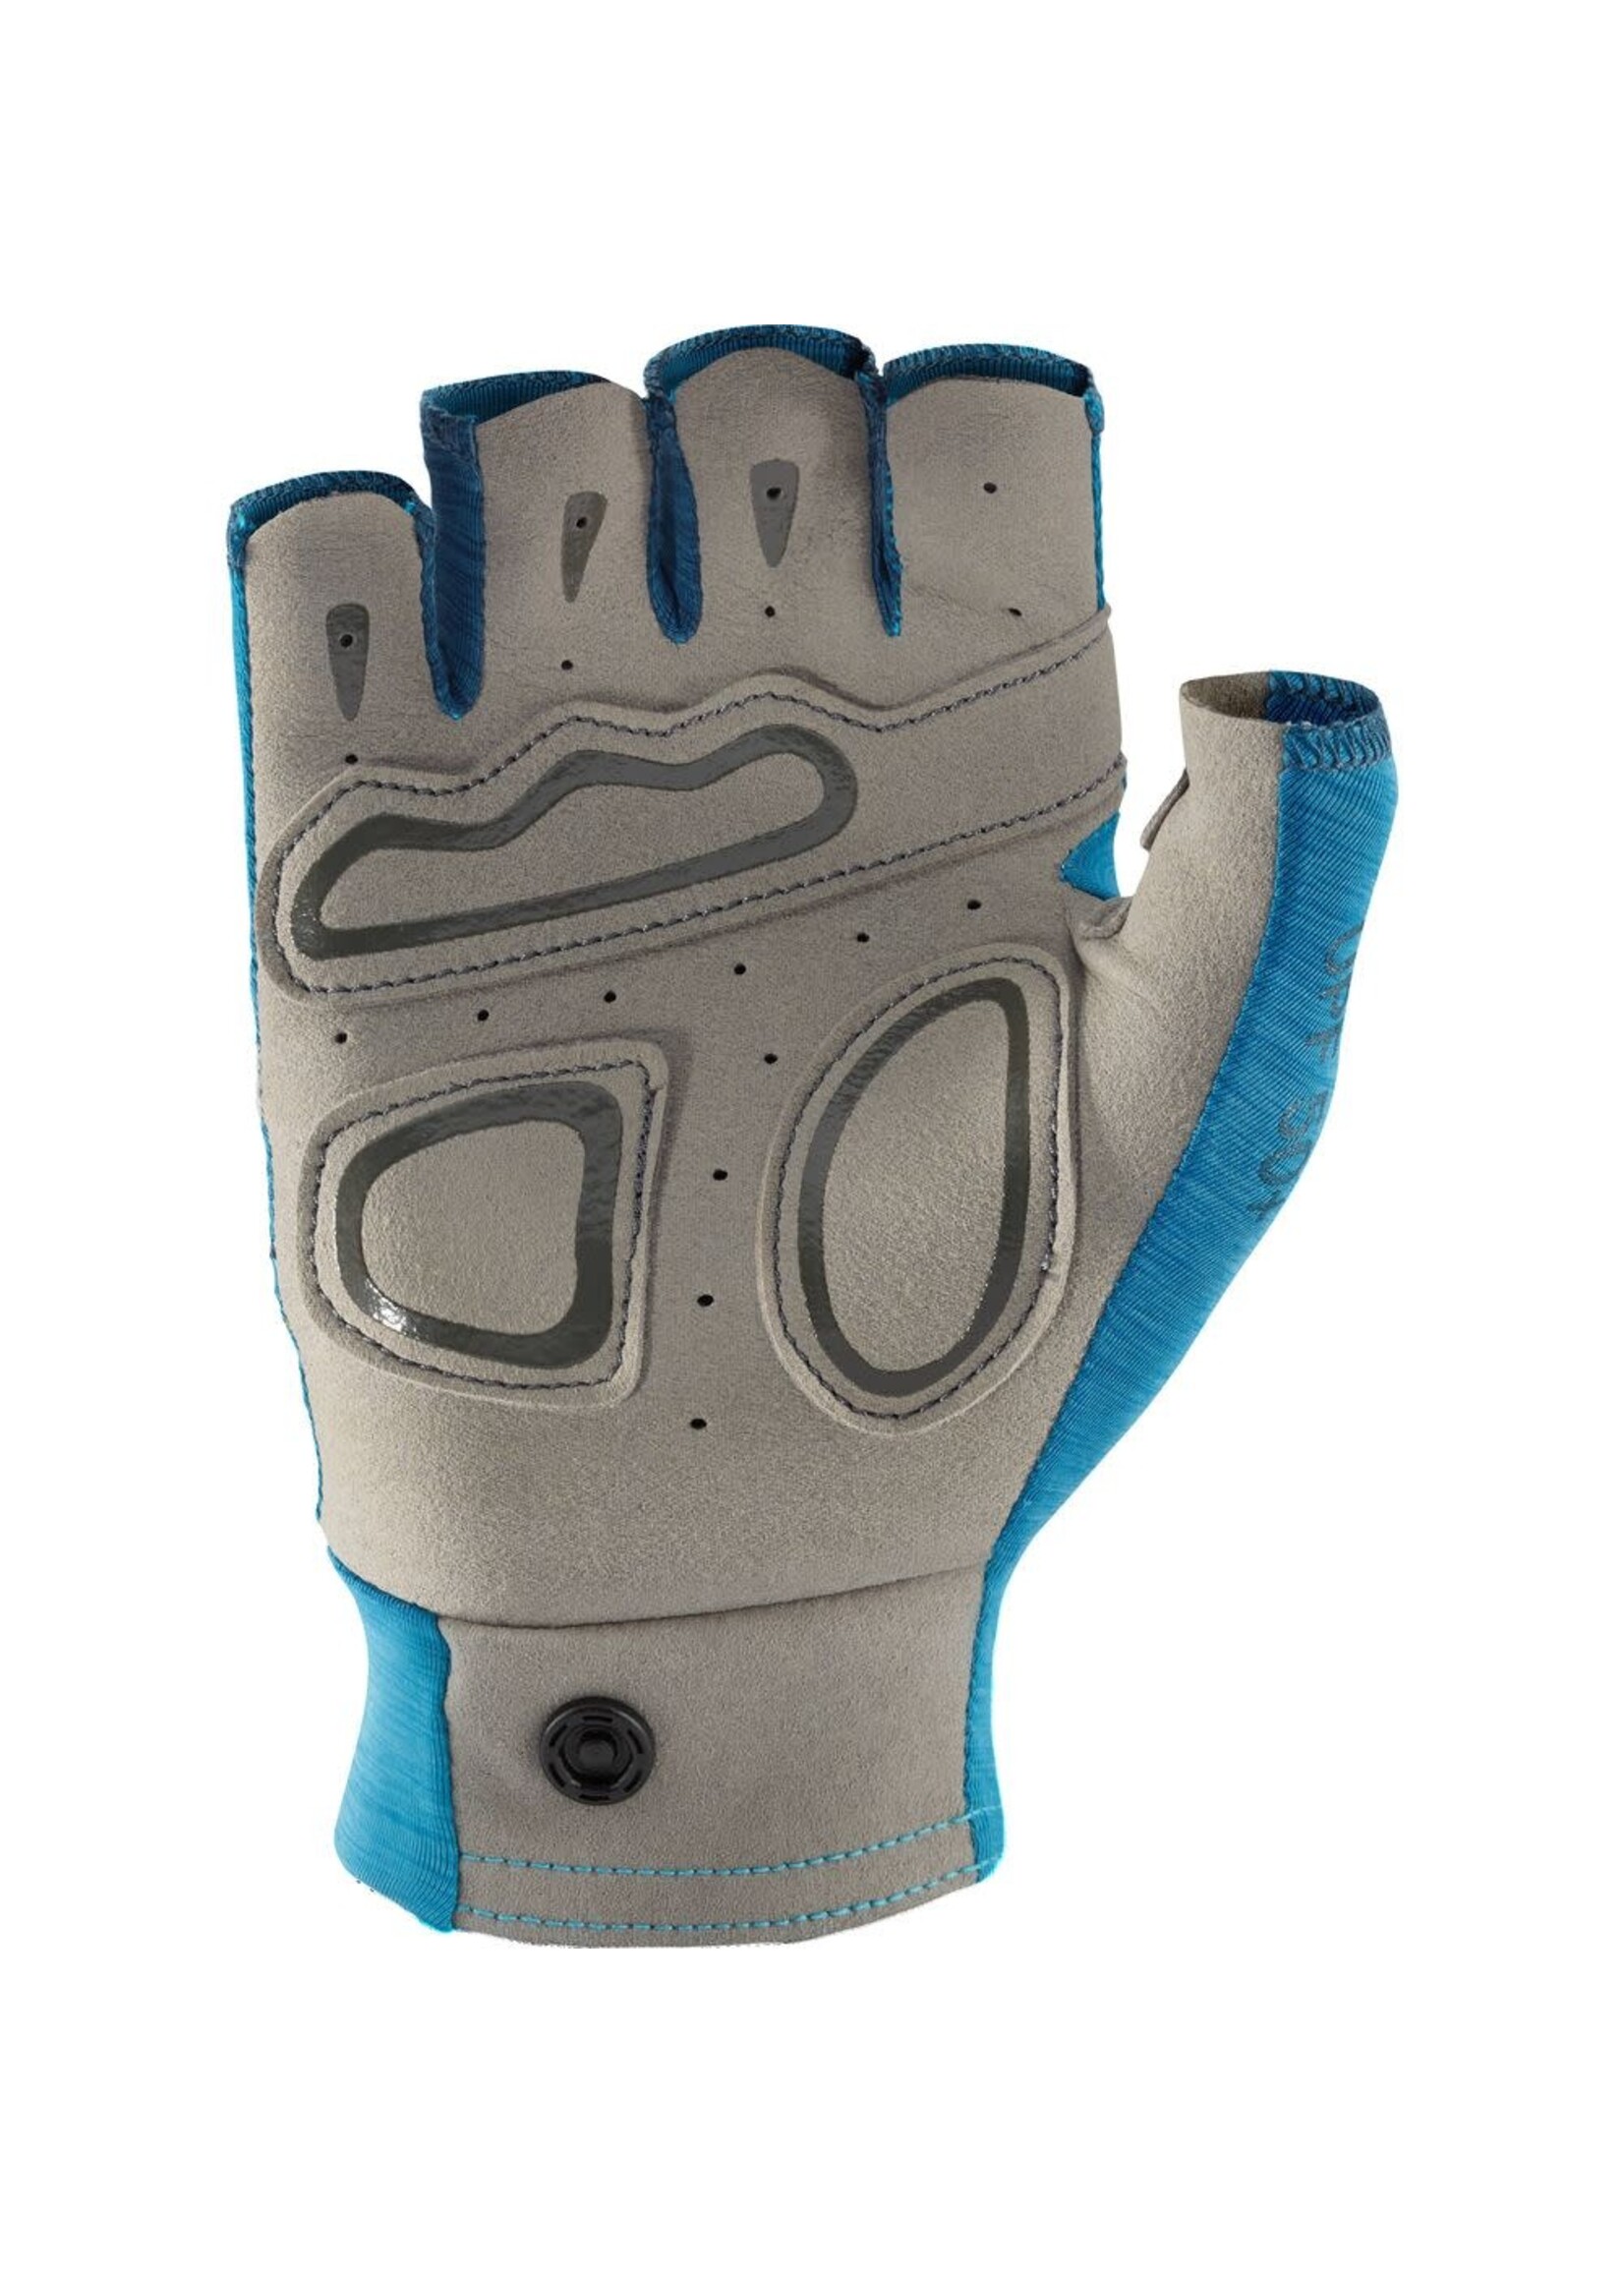 NRS NRS Womens Boater's Glove Fjord- XS